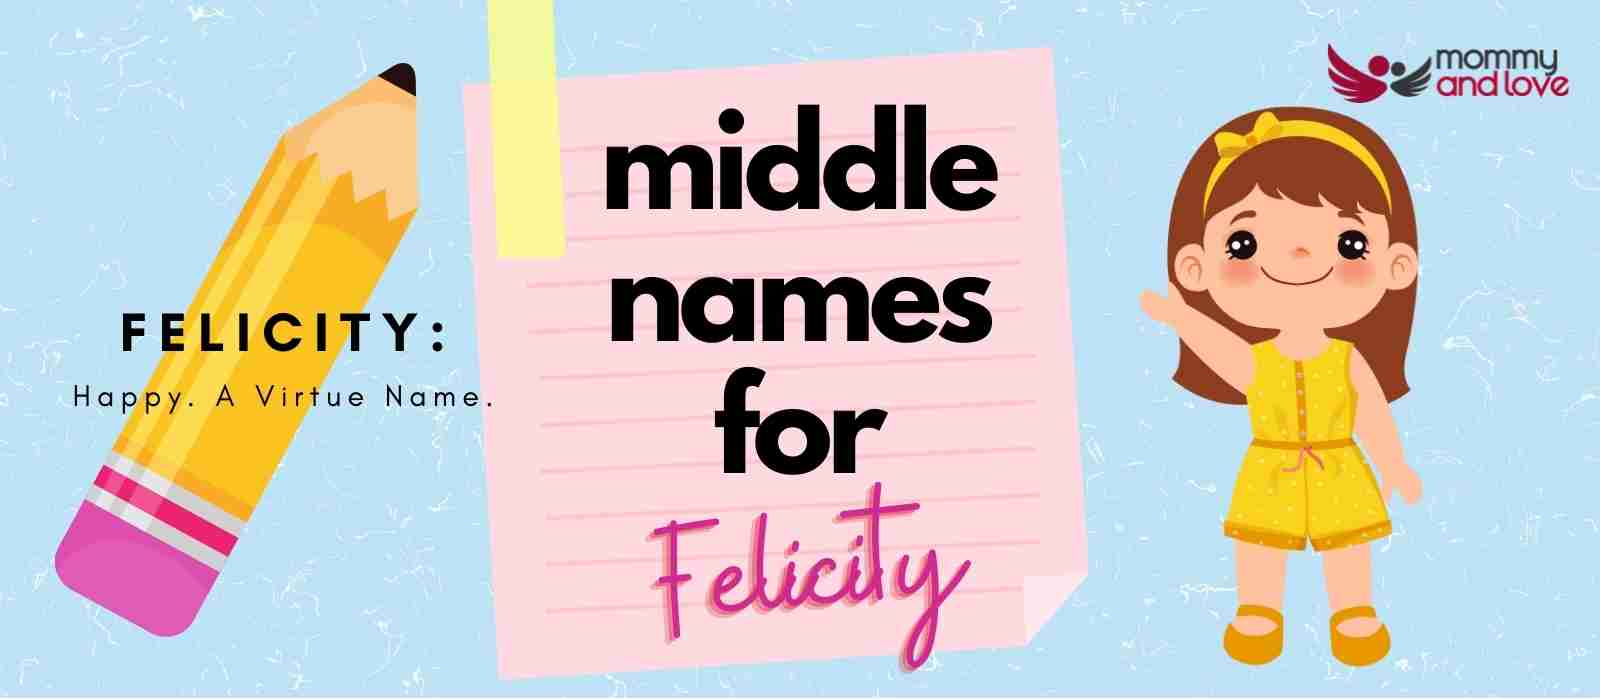 Middle Names for Felicity